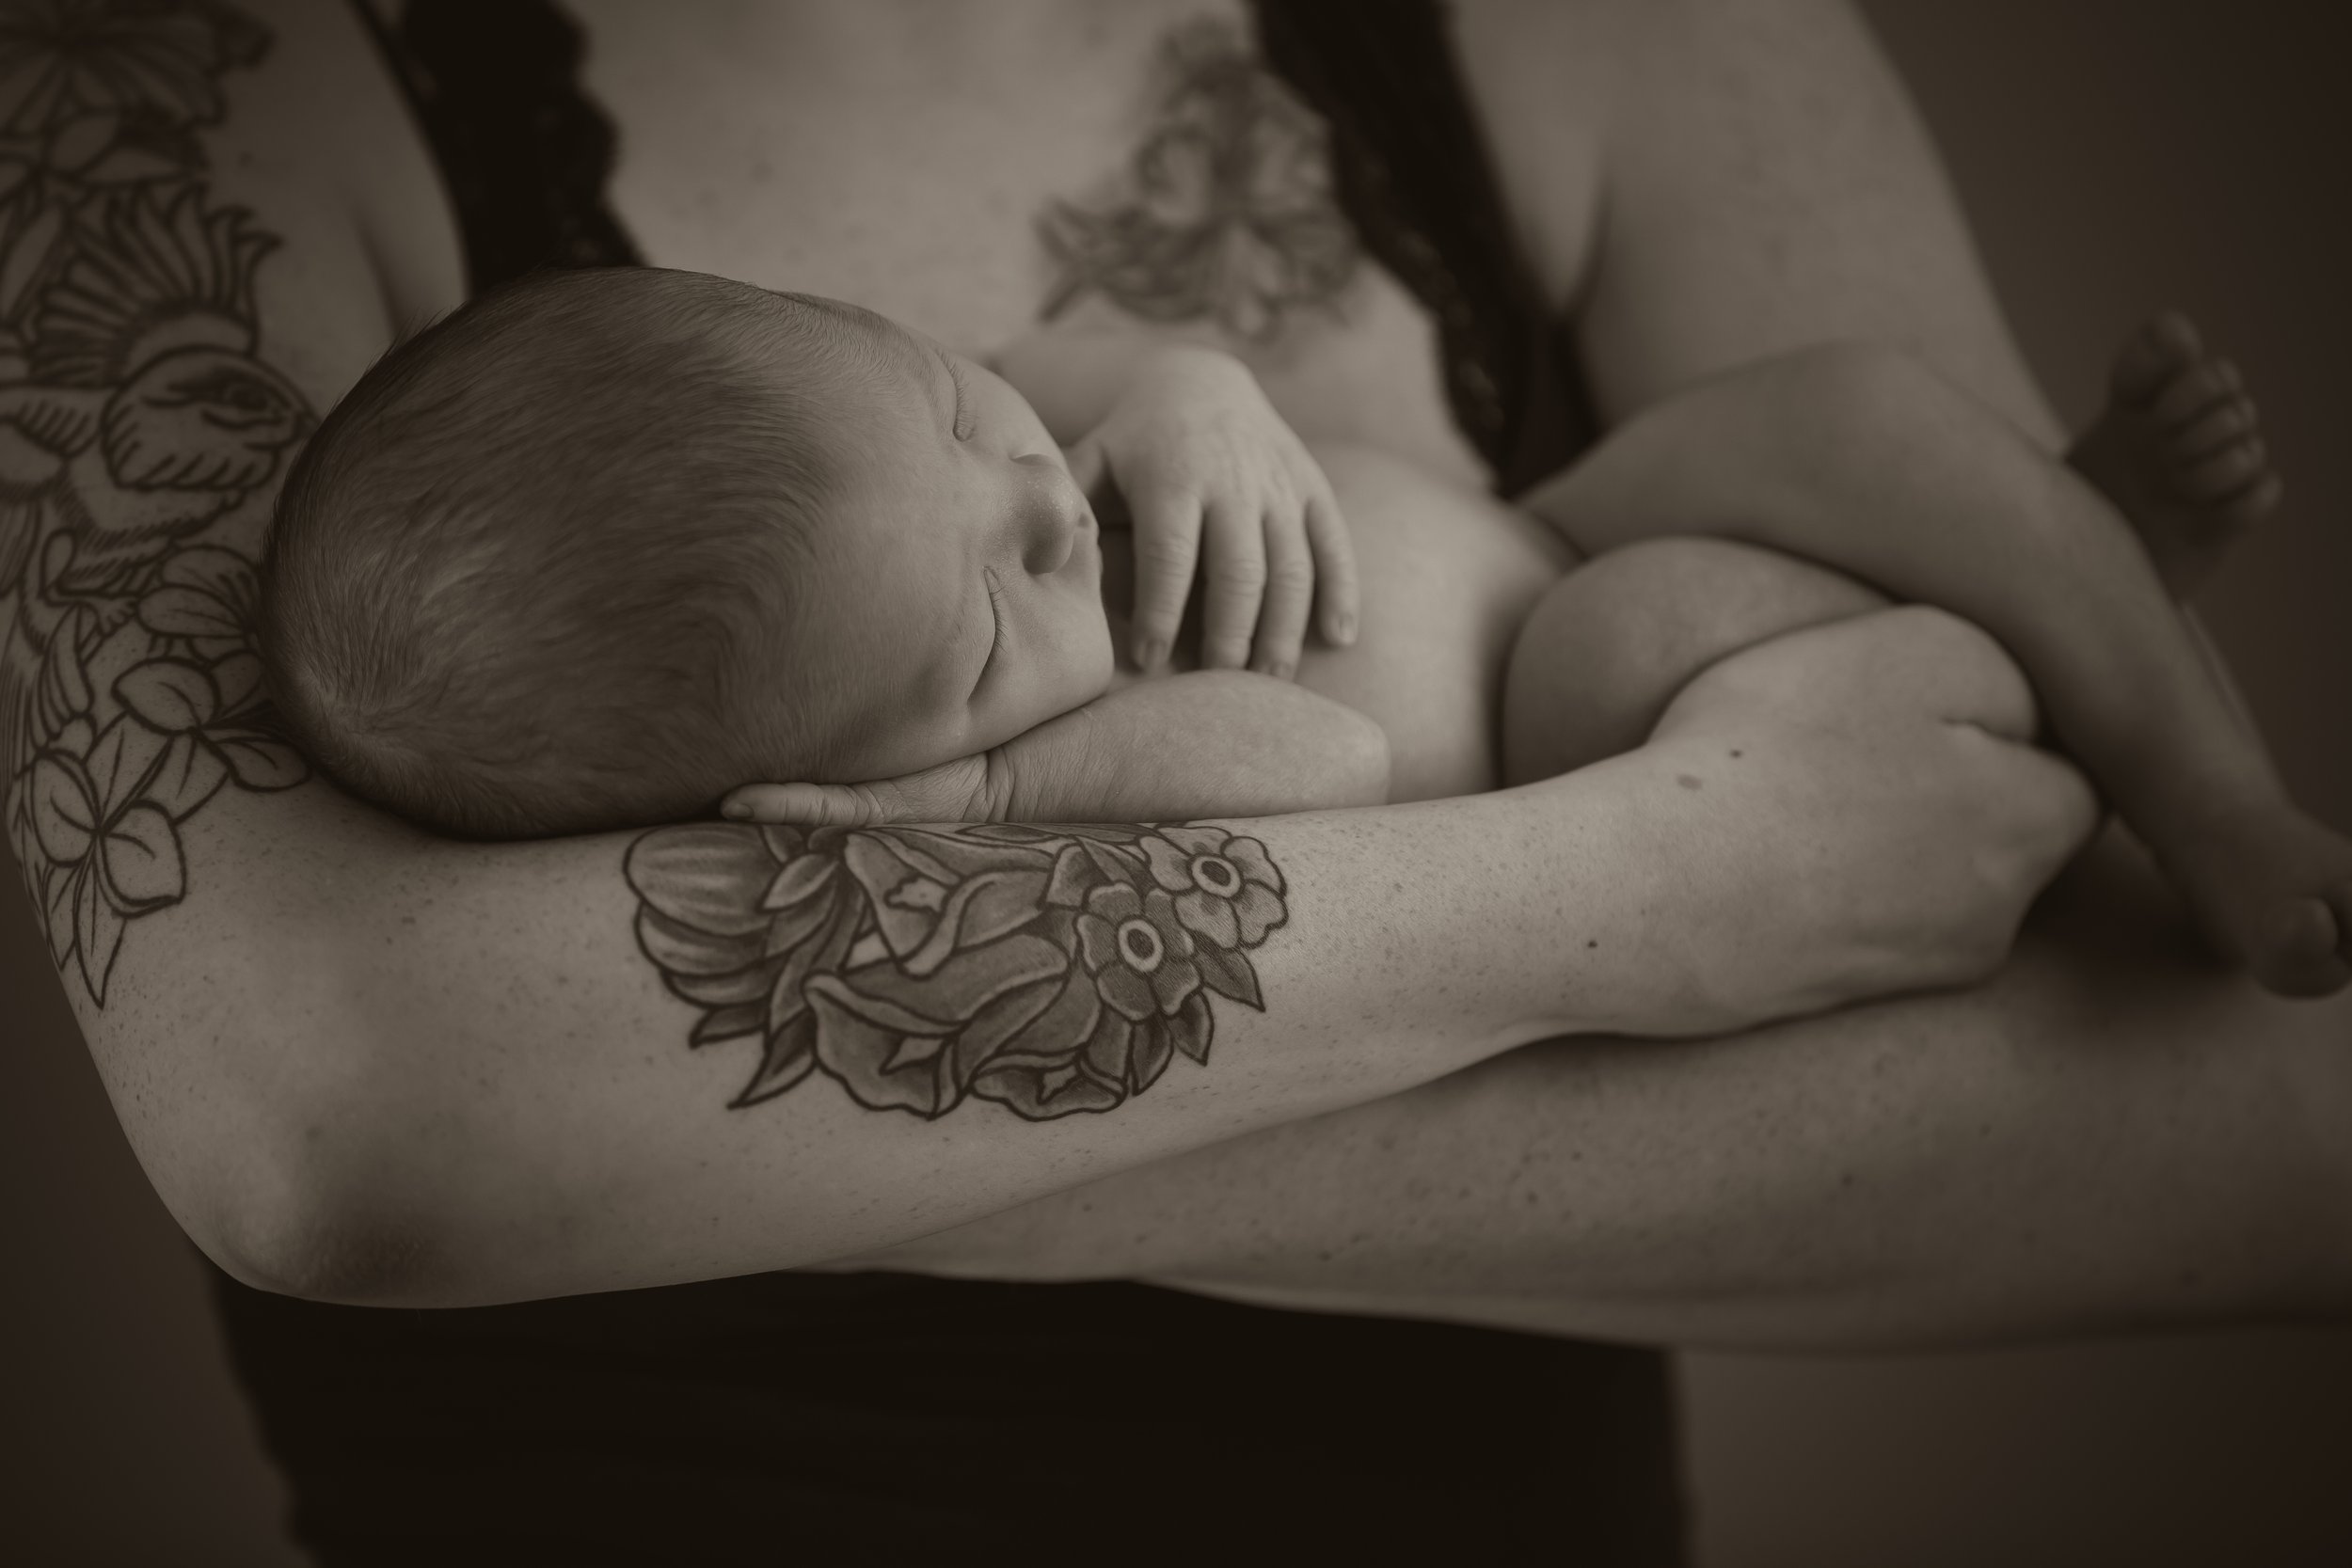 black and white image of tattooed mom cradling baby in arms